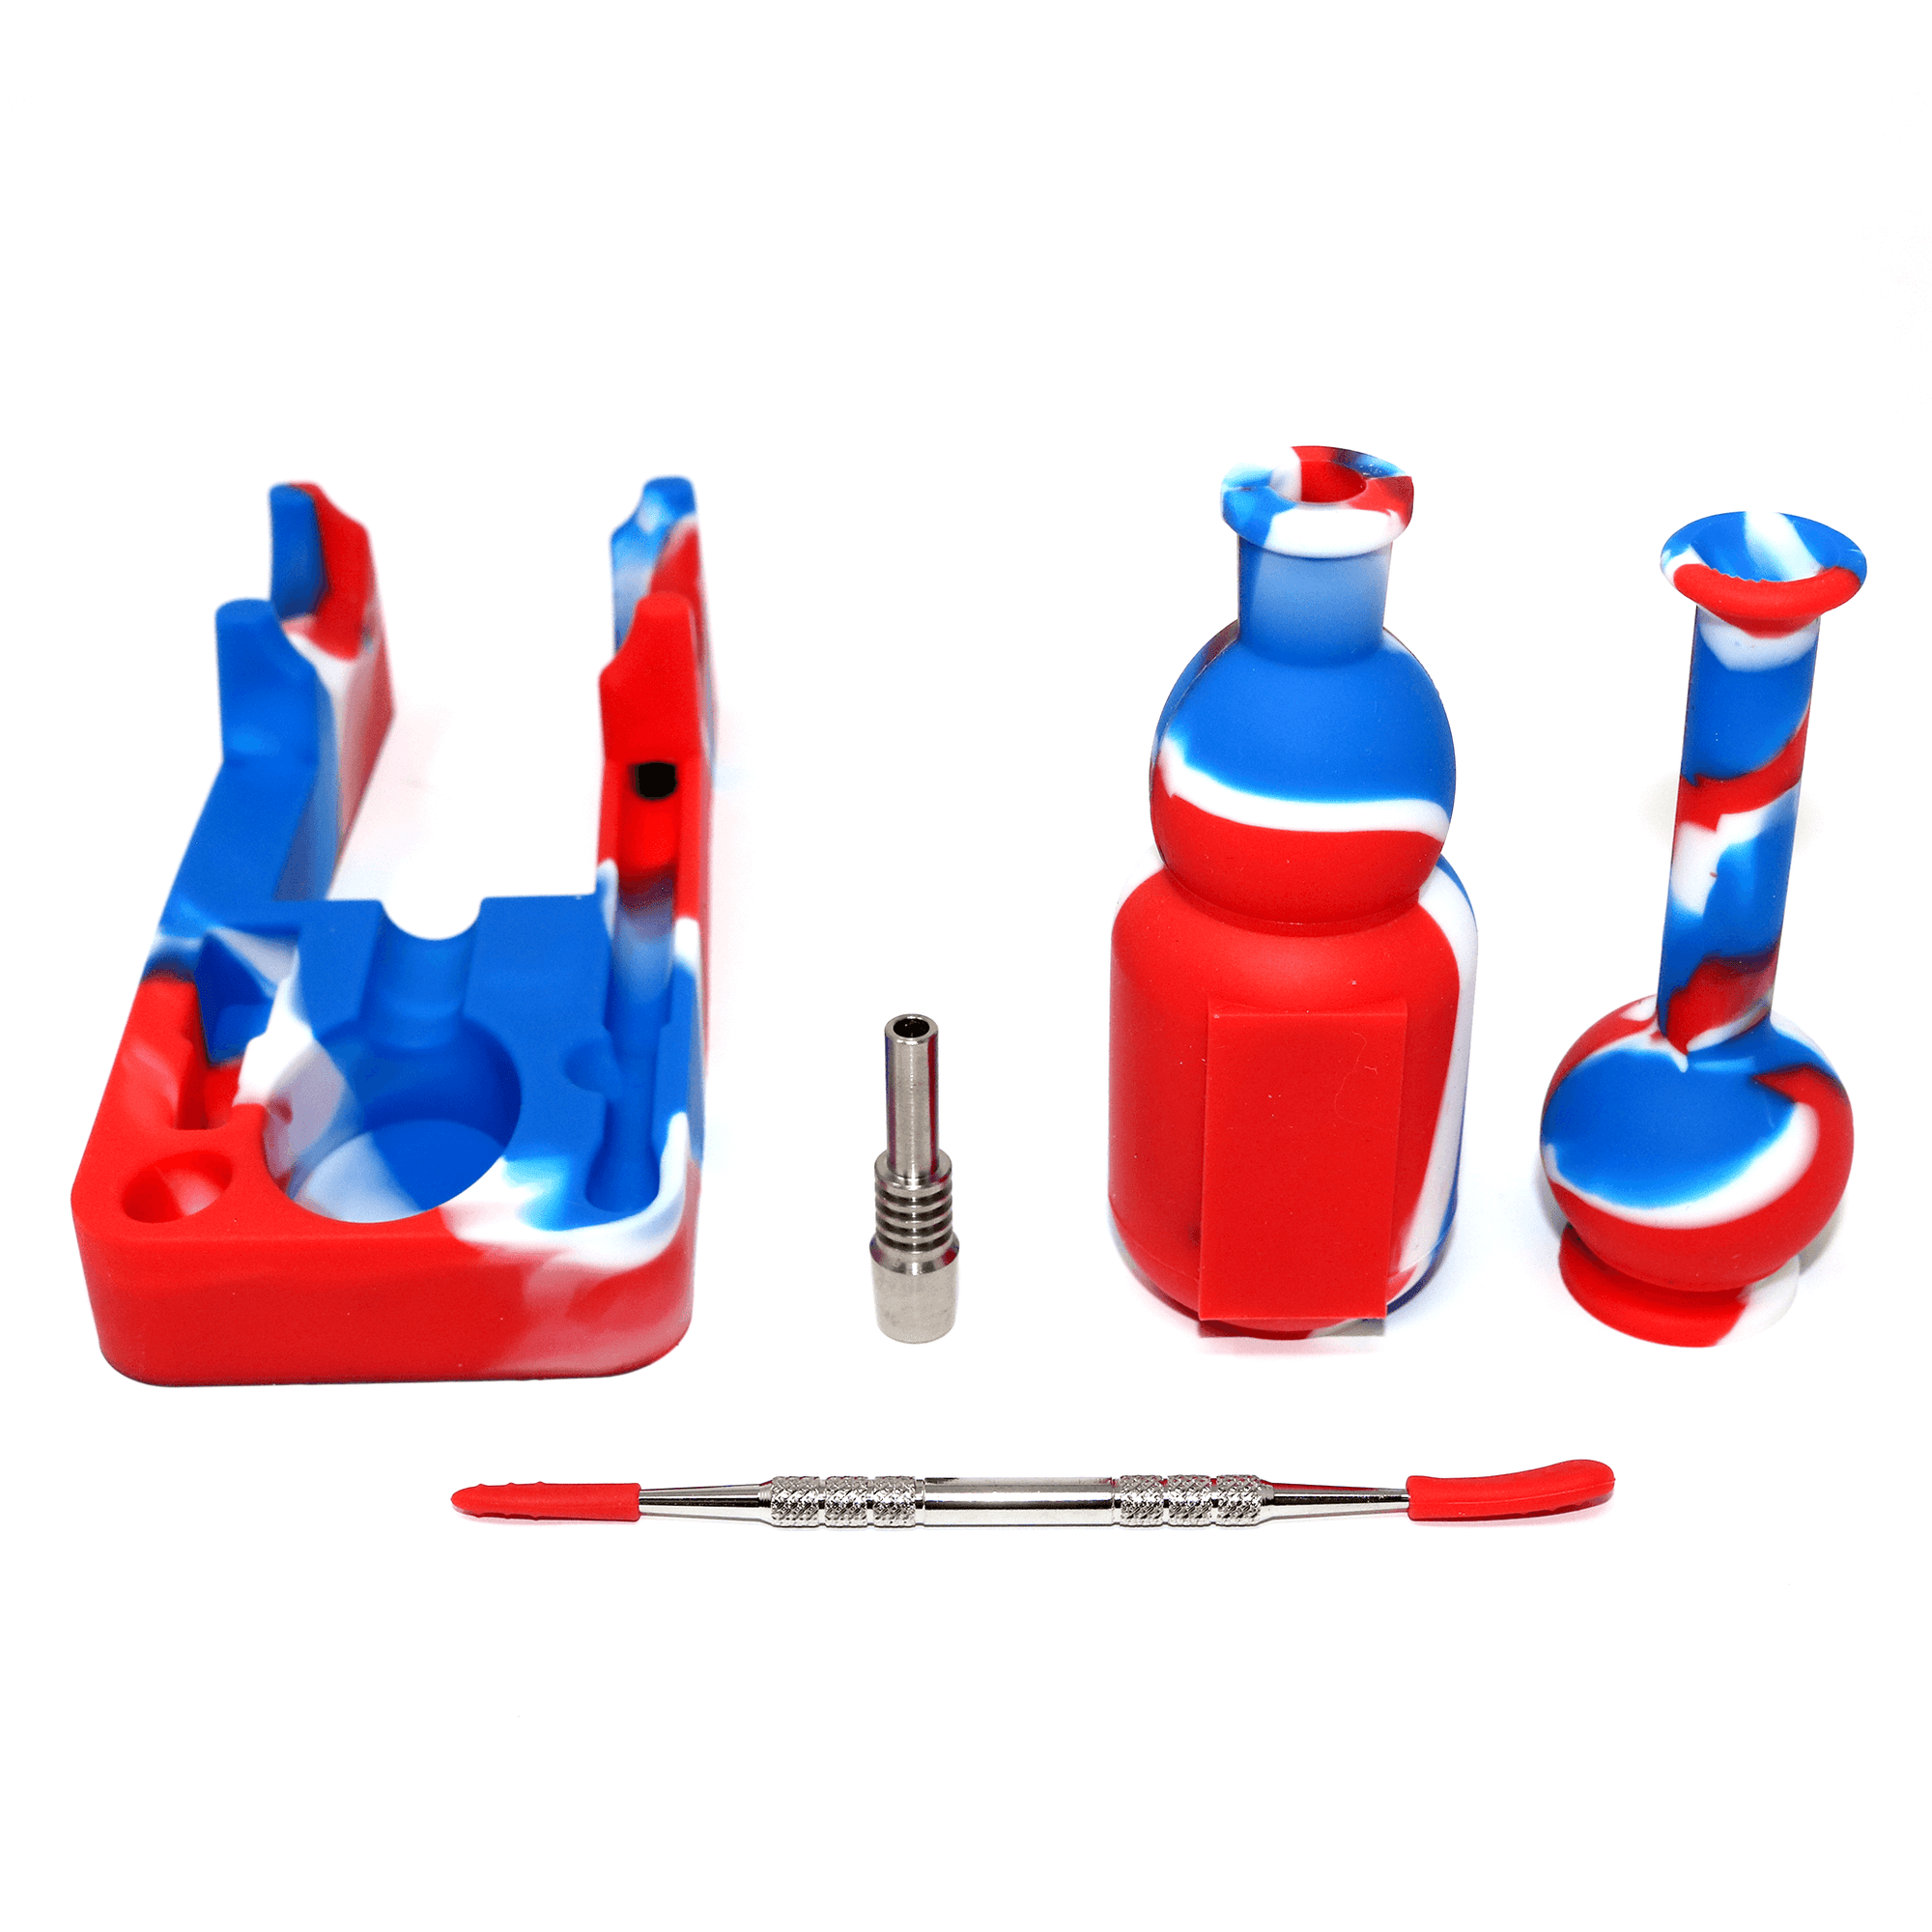 Silicone Nectar Collector | Red, White, & Blue Top Down Complete View | Dabbing Warehouse